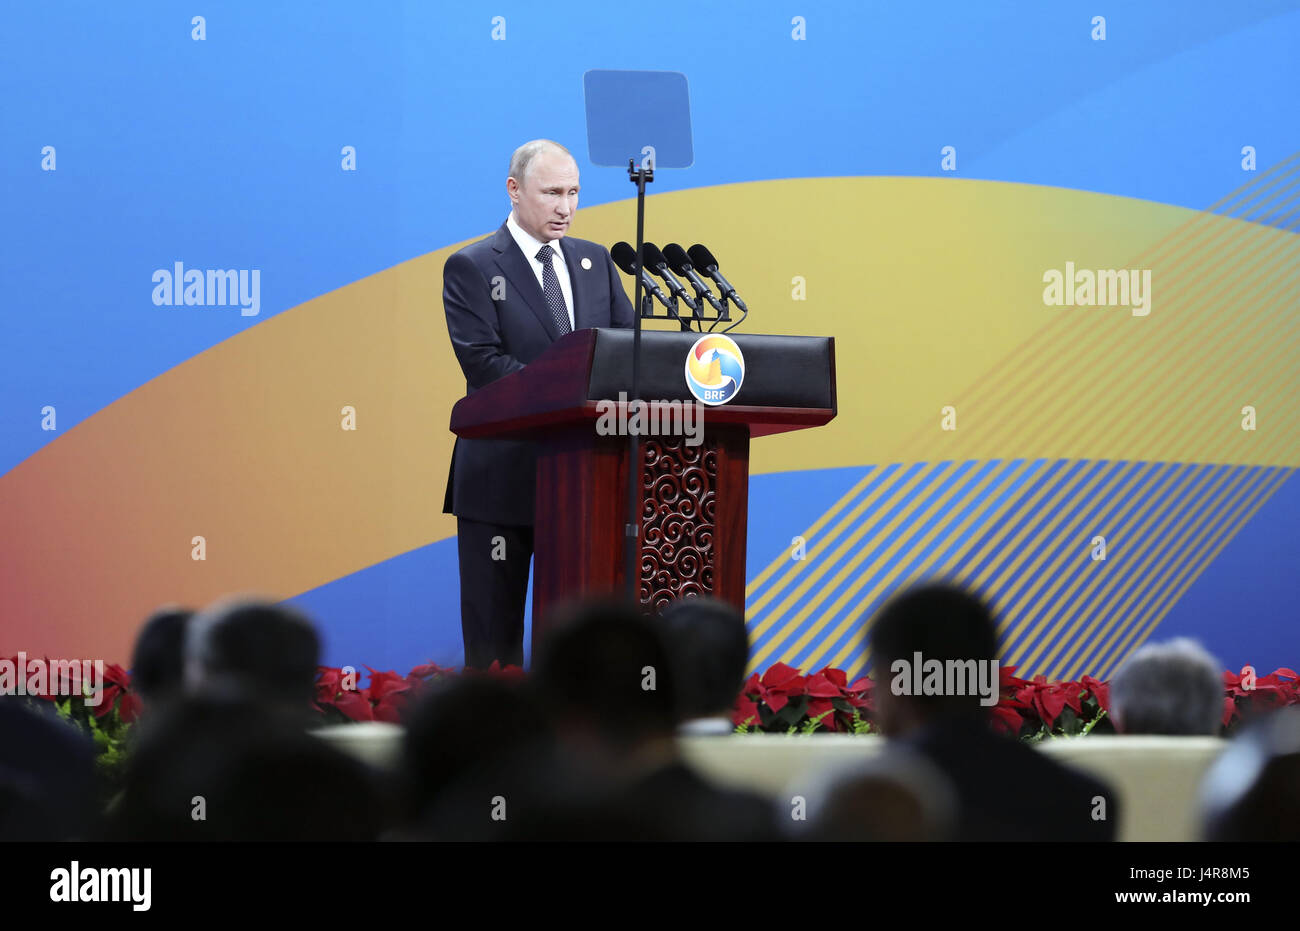 Beijing, China. 14th May, 2017. Russian President Vladimir Putin addresses the opening ceremony of the Belt and Road Forum for International Cooperation in Beijing, capital of China, May 14, 2017. Credit: Pang Xinglei/Xinhua/Alamy Live News Stock Photo